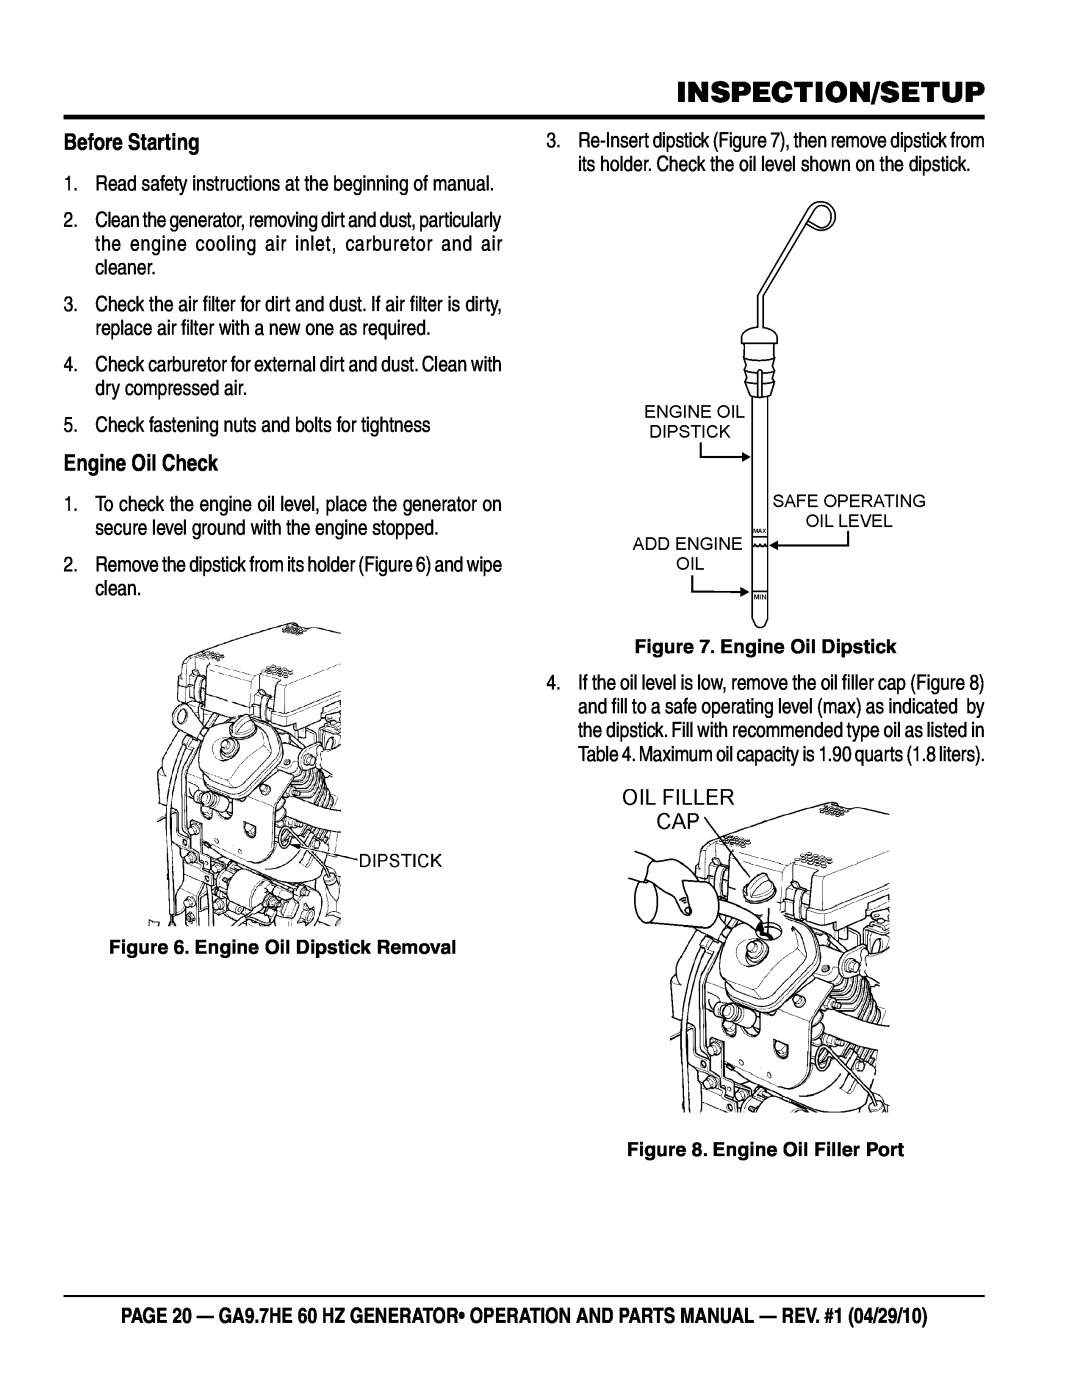 Multiquip ga-9.7HE manual Before Starting, Engine Oil Check, Inspection/Setup, Engine Oil Dipstick Removal 